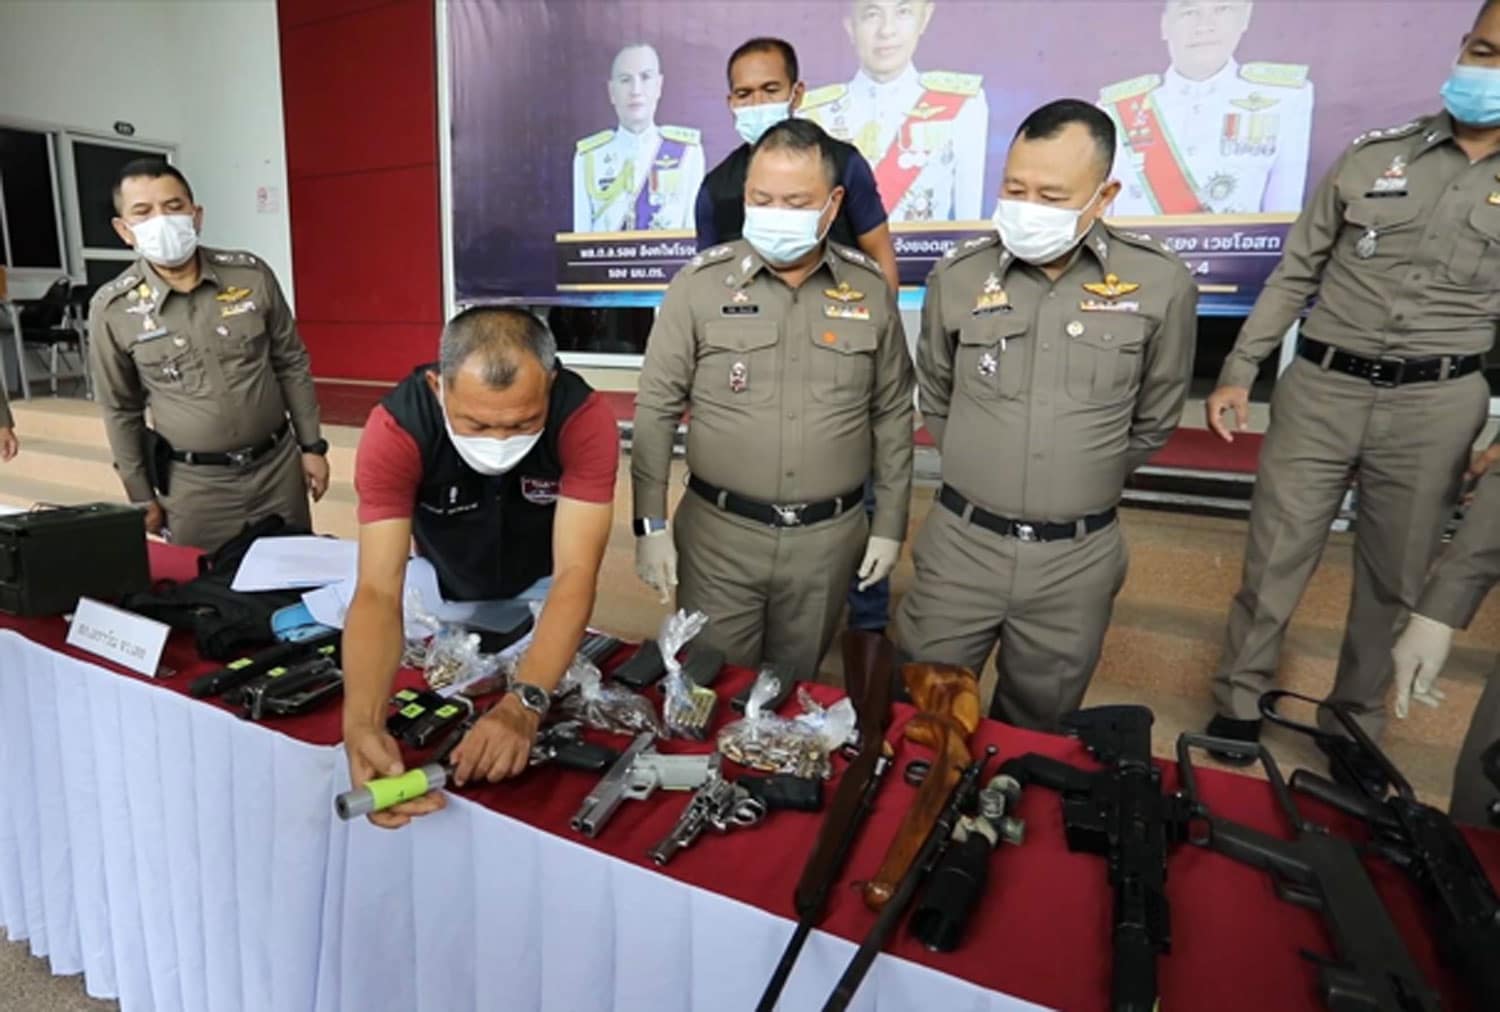 Police in northeastern Thailand on Wednesday seized more than 20 weapons, ammunition and some illegal drugs during a raid in Loei province.